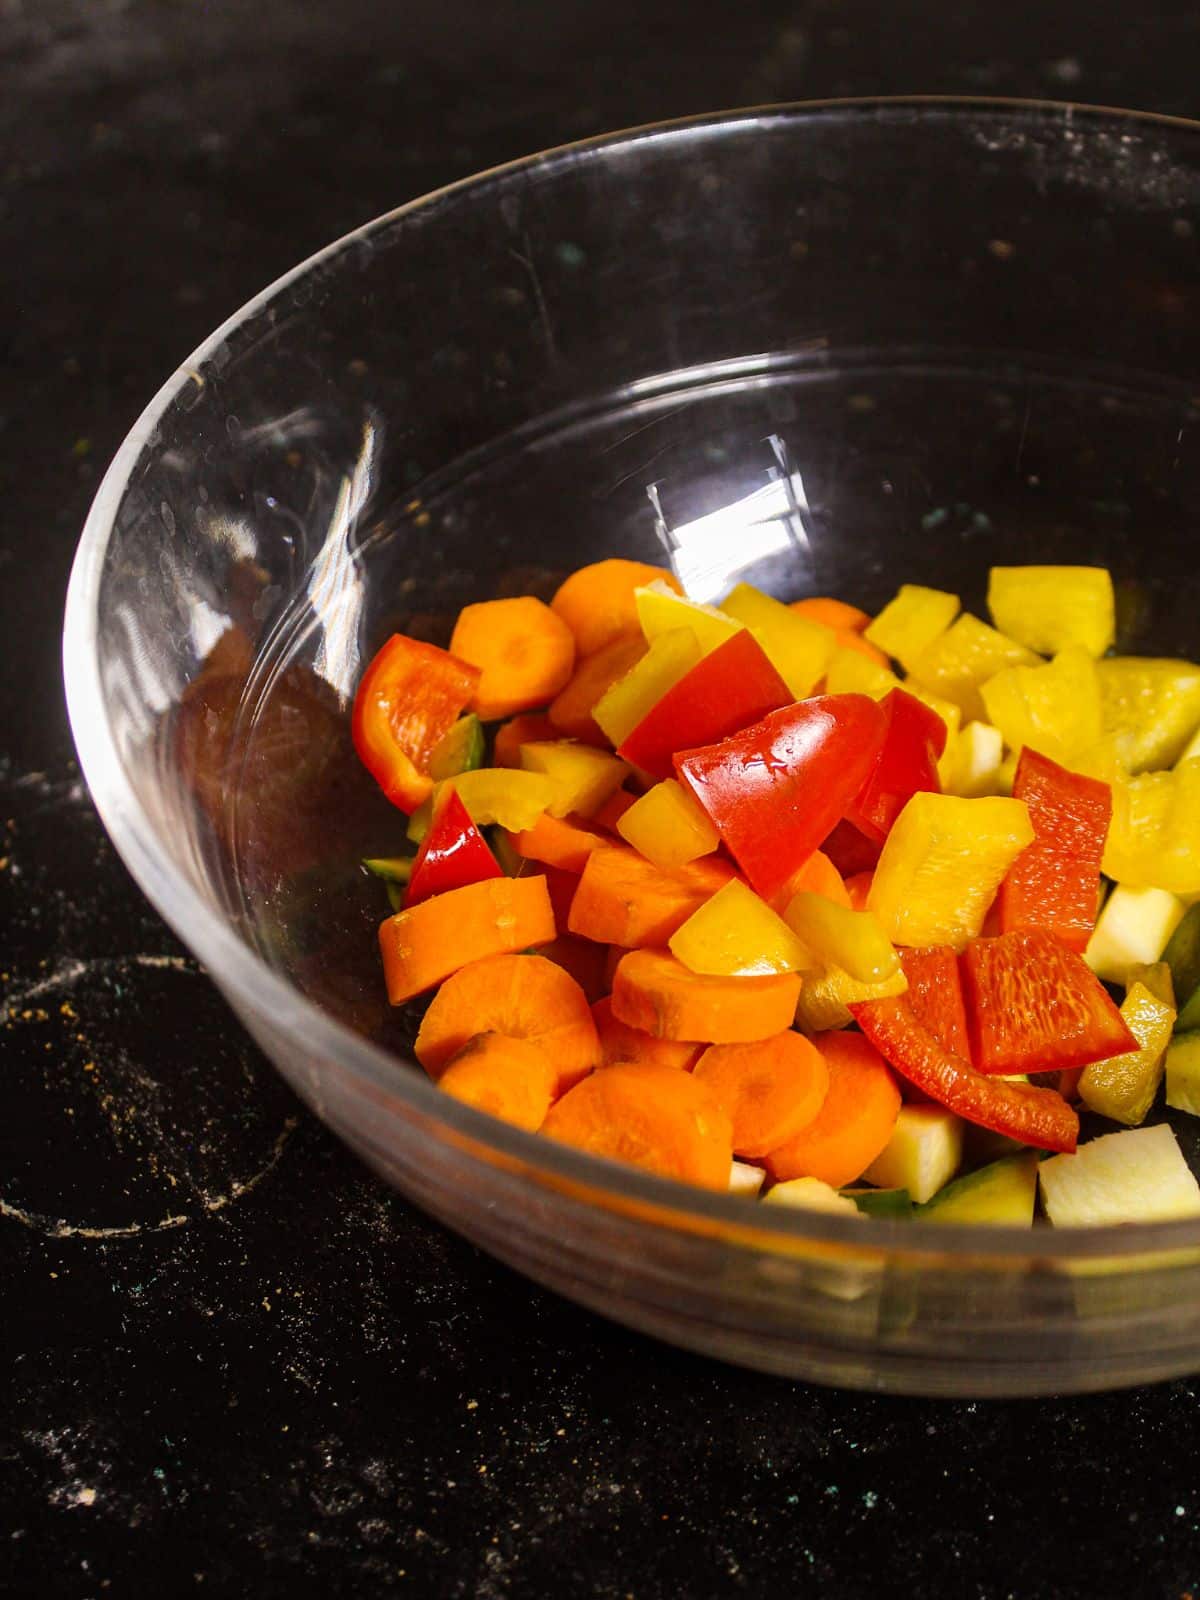 Add chopped red and yellow bell peppers into the bowl 